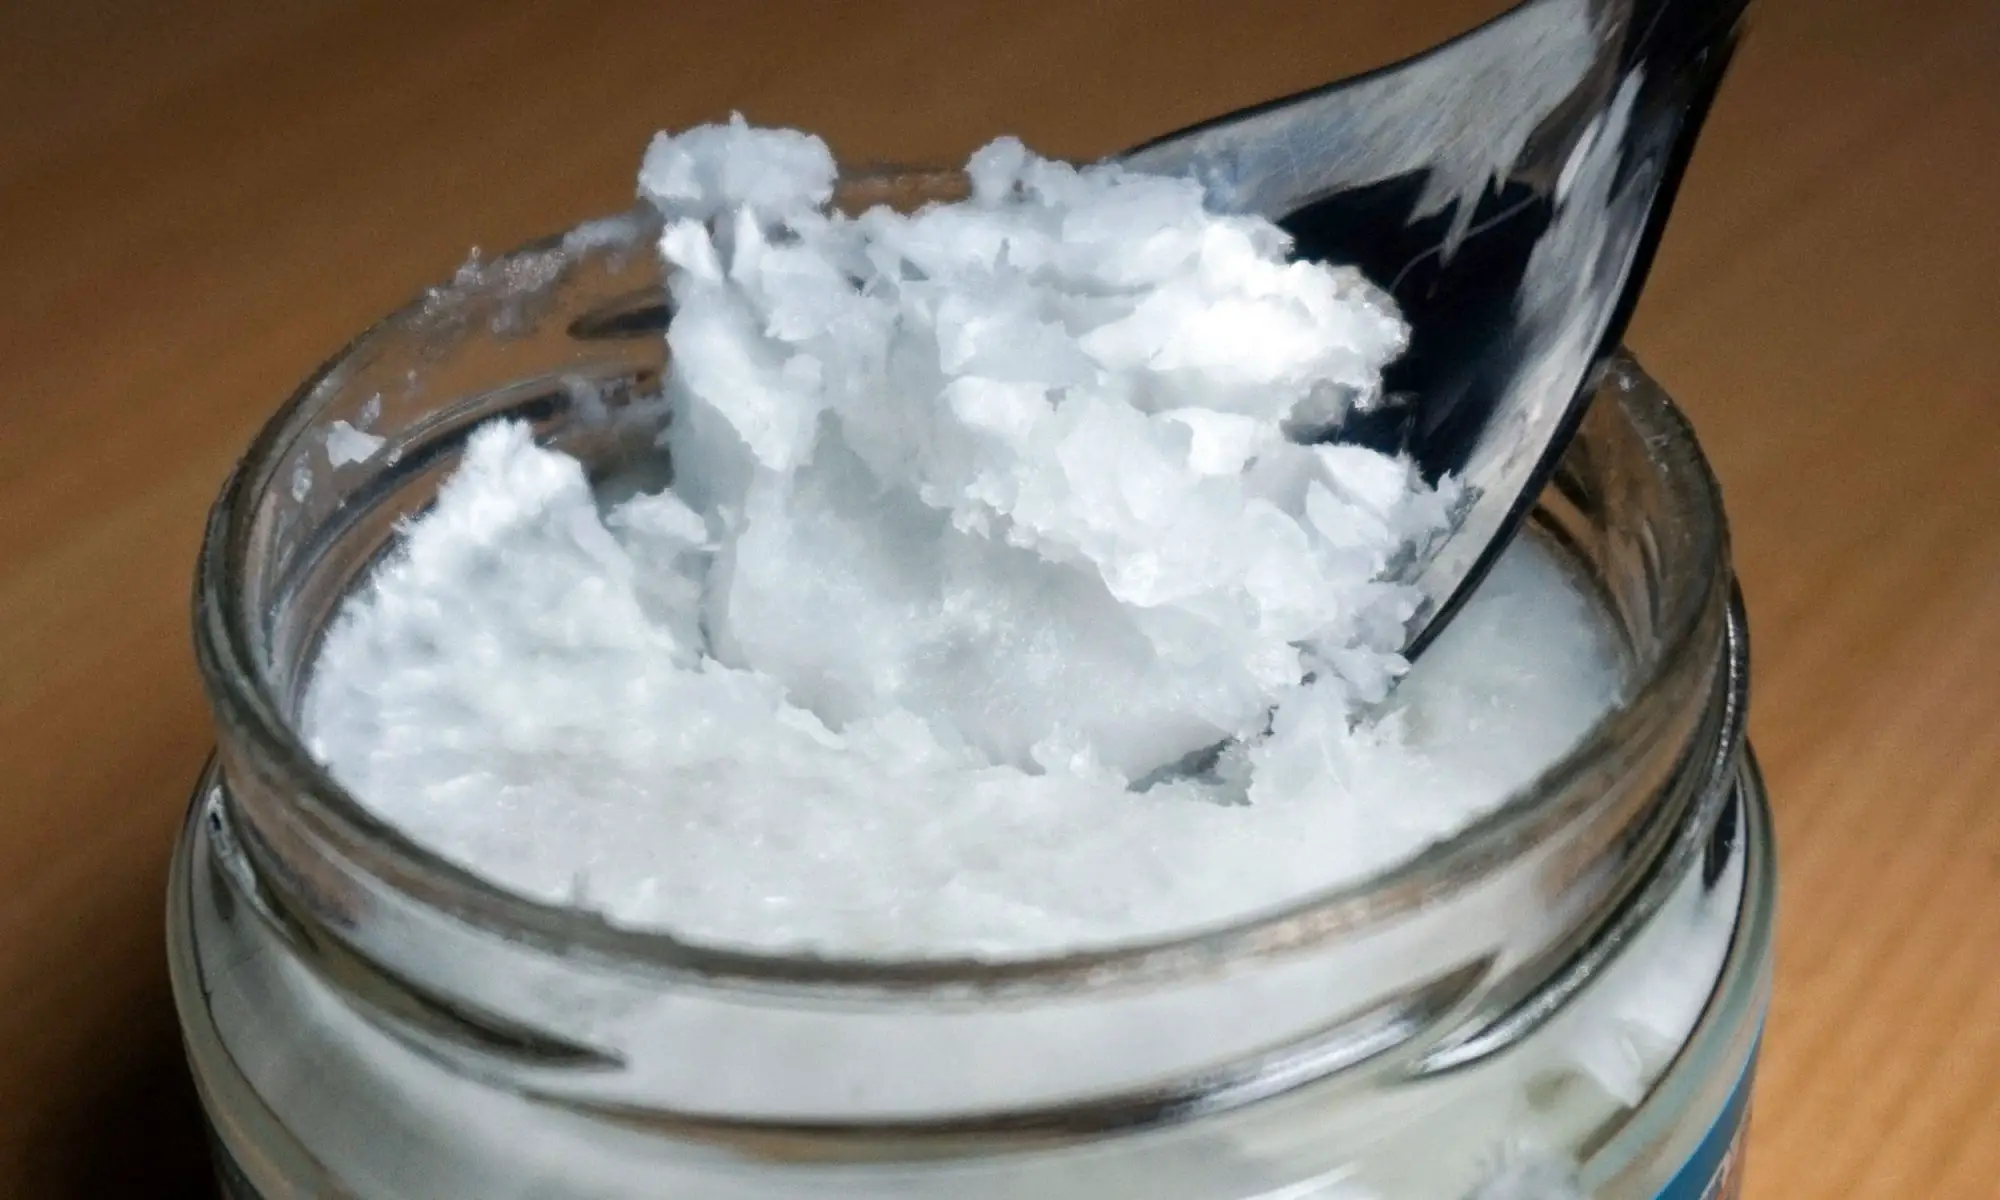 Does coconut oil need to be refrigerated?